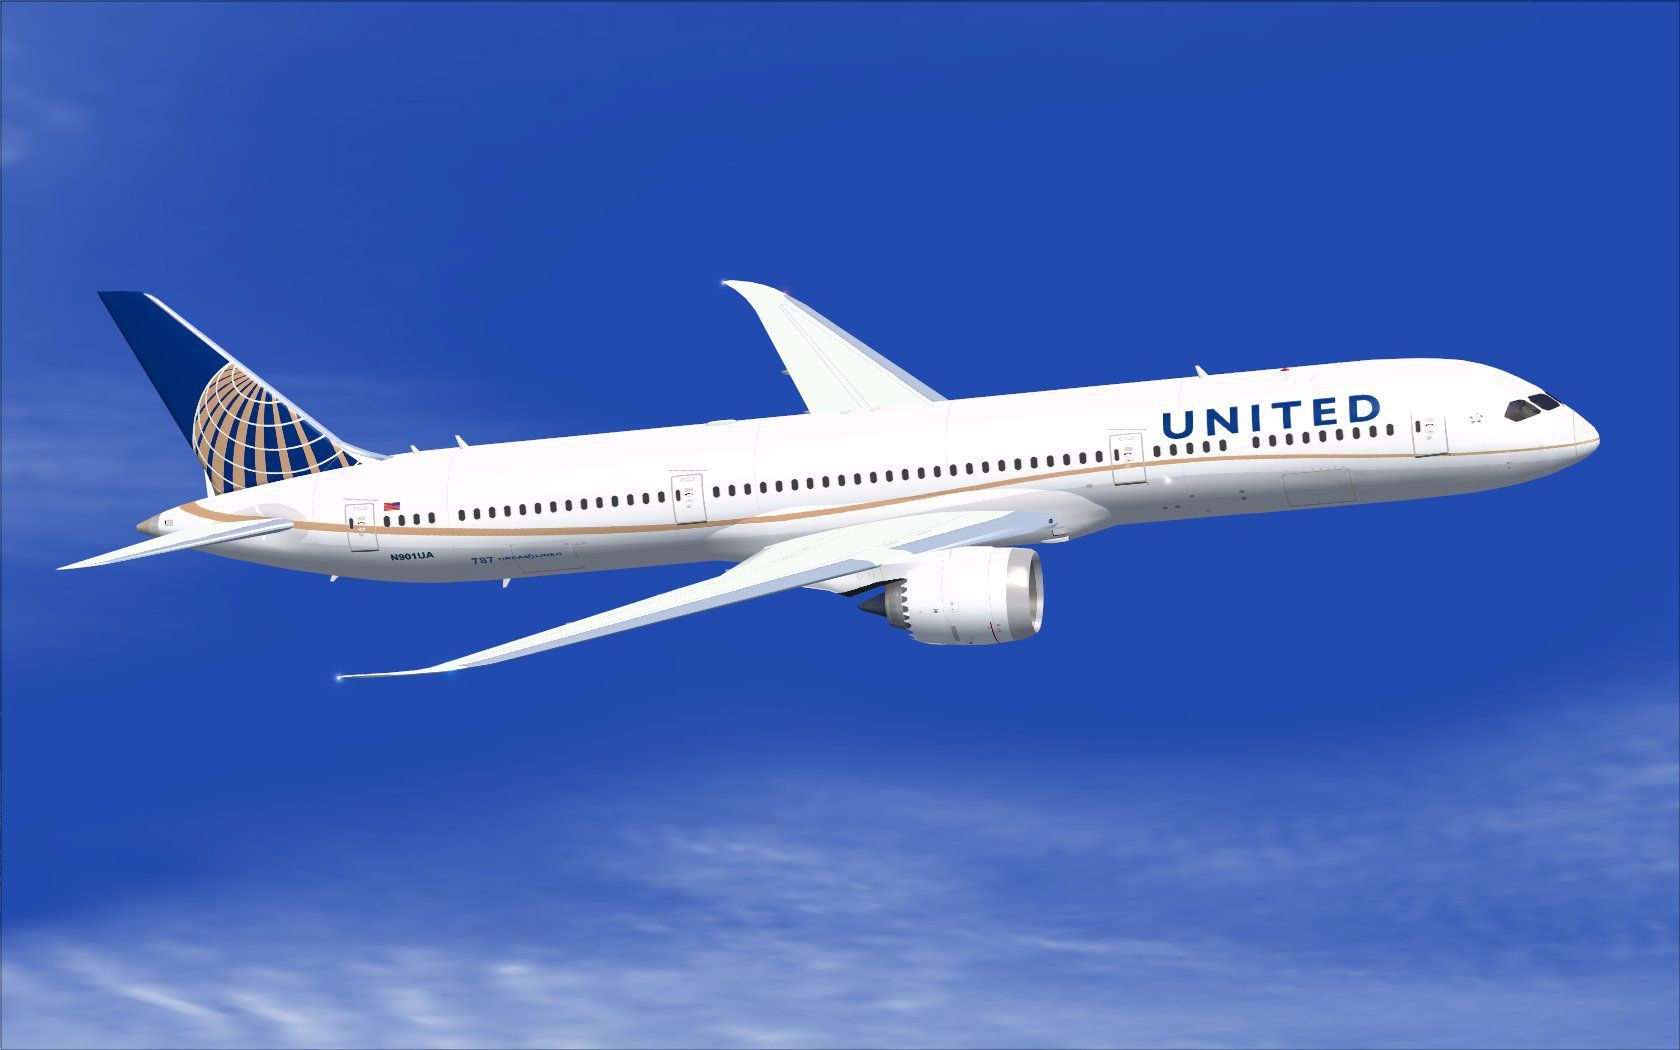 United Airlines Wallpapers